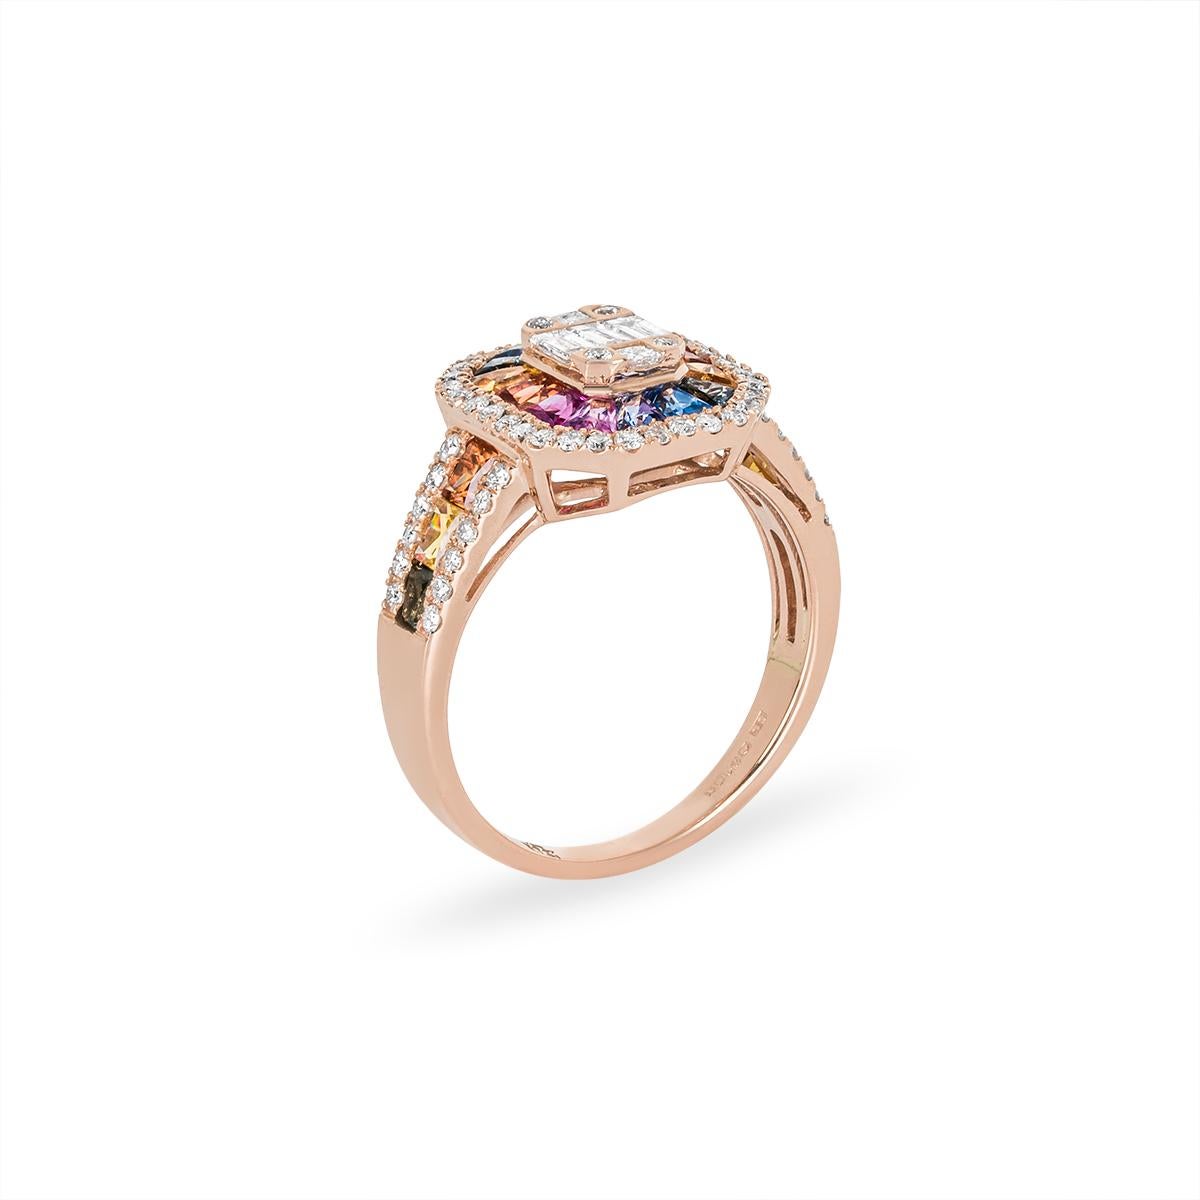 An exuberant 18k rose gold multi-coloured sapphire and diamond dress ring. The centre of the ring comprises of 4 round brilliant cut diamonds, 3 baguette cut diamonds and 2 princess cut diamonds to form an emerald cut illusion. Surrounding the